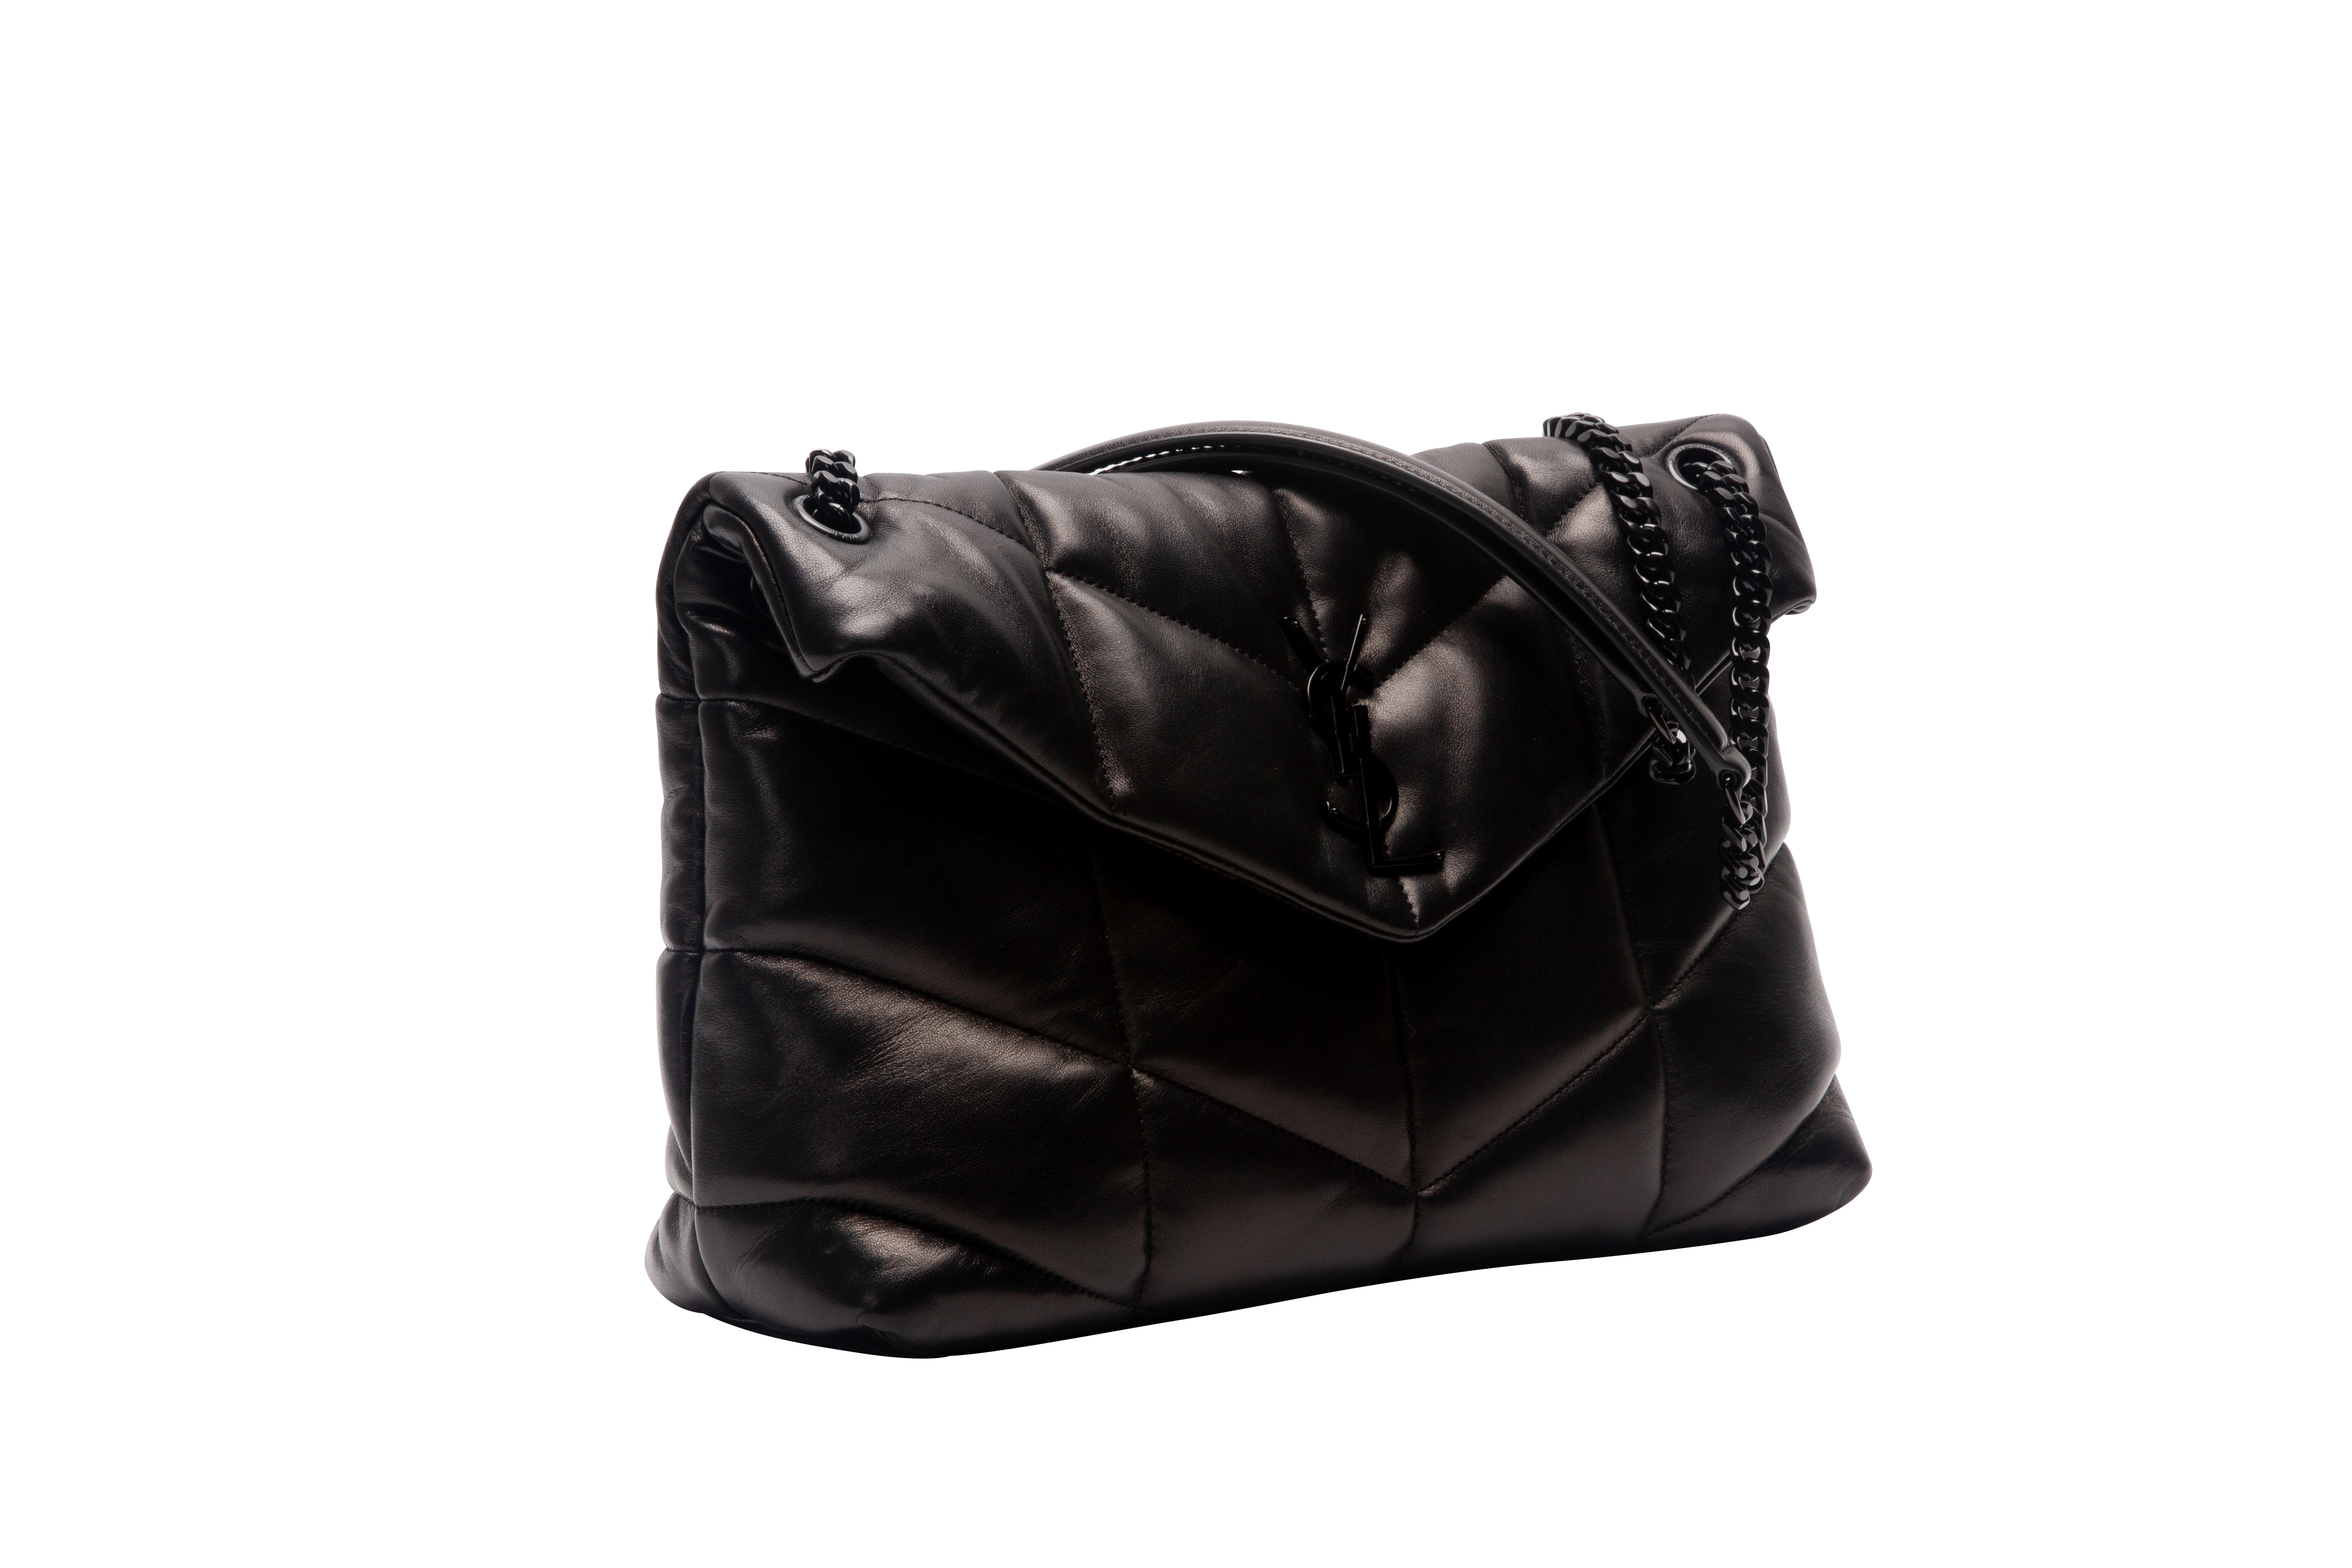 AN YVES SAINT LAURENT LOULOU QUILTED LEATHER SHOULDER BAG